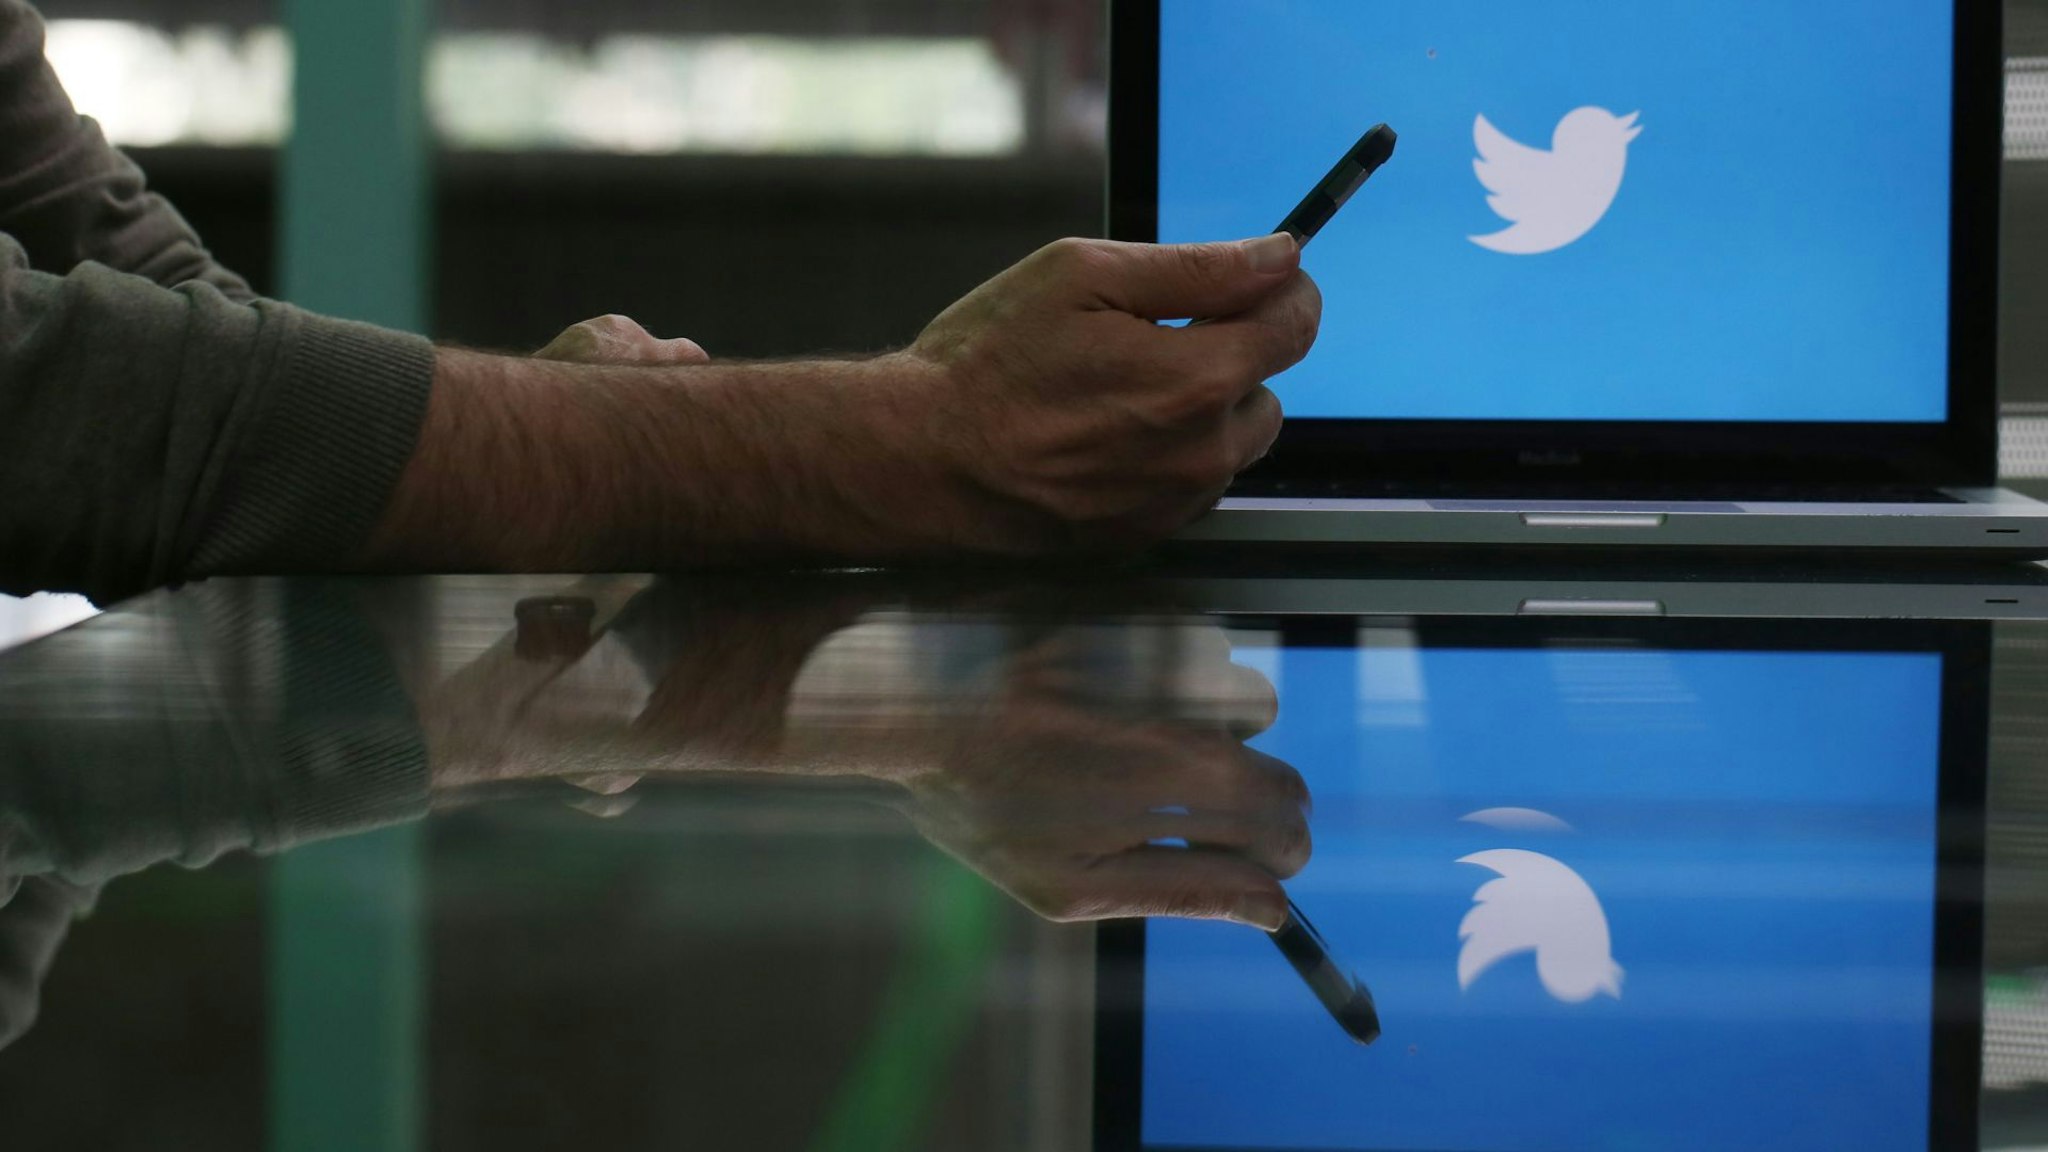 An Apple Inc. iPhone 6 smartphone is held as a laptop screen shows the Twitter Inc. logo in this arranged photograph taken in London, U.K., on Friday, May, 15, 2015.